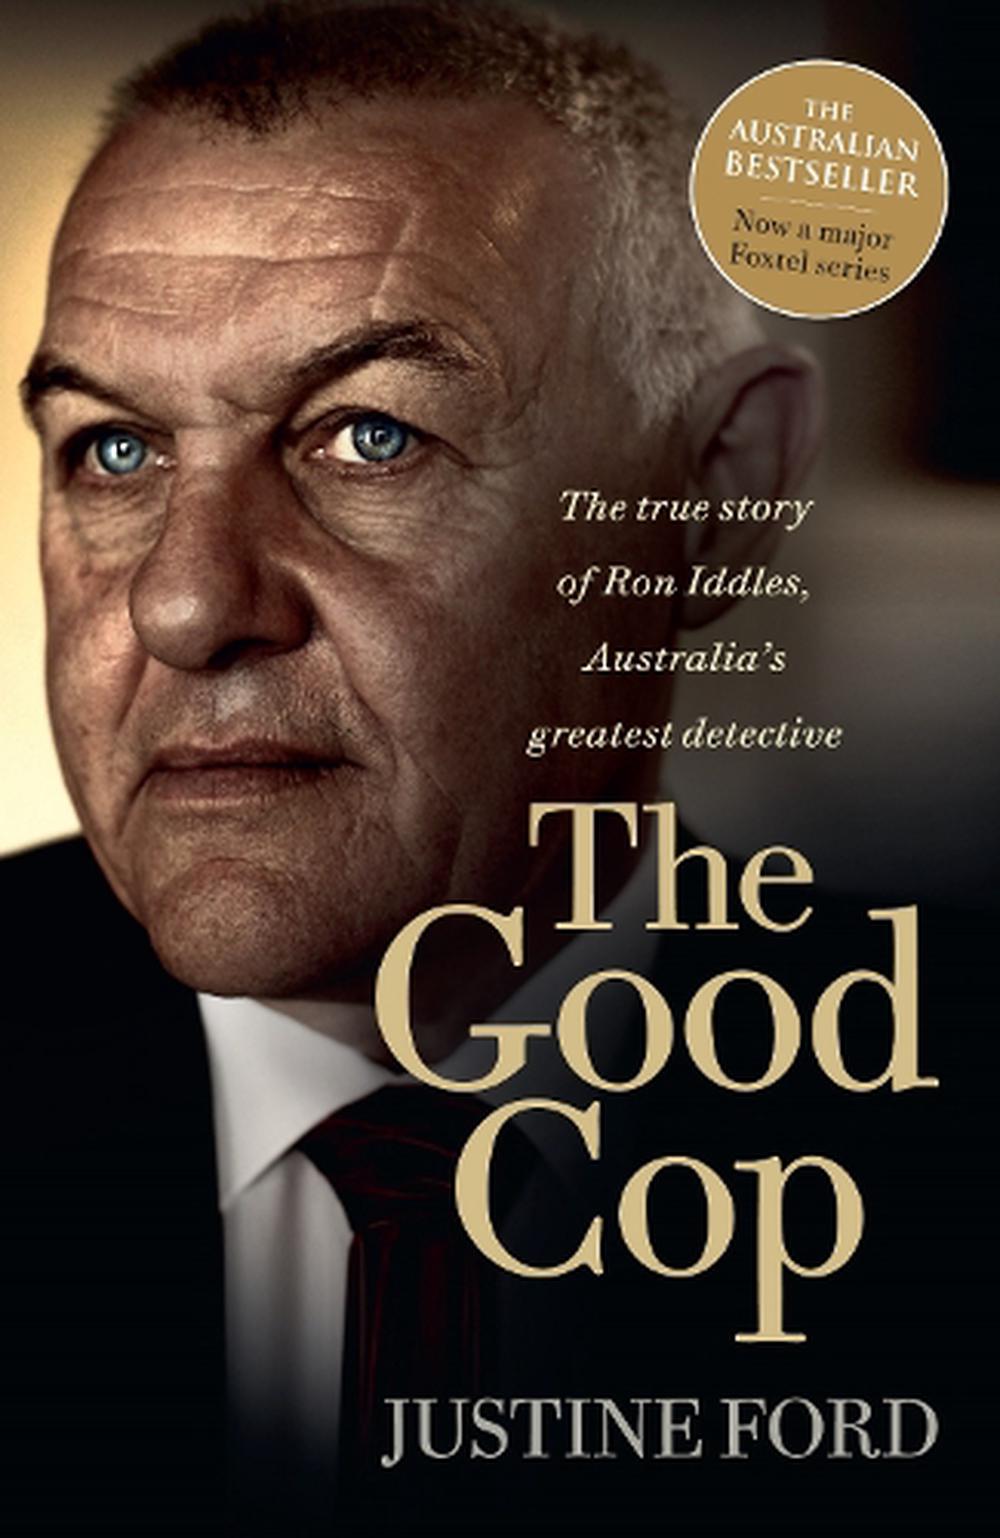 The Good Cop by Justine Ford, Paperback, 9781760558123 | Buy online at ...